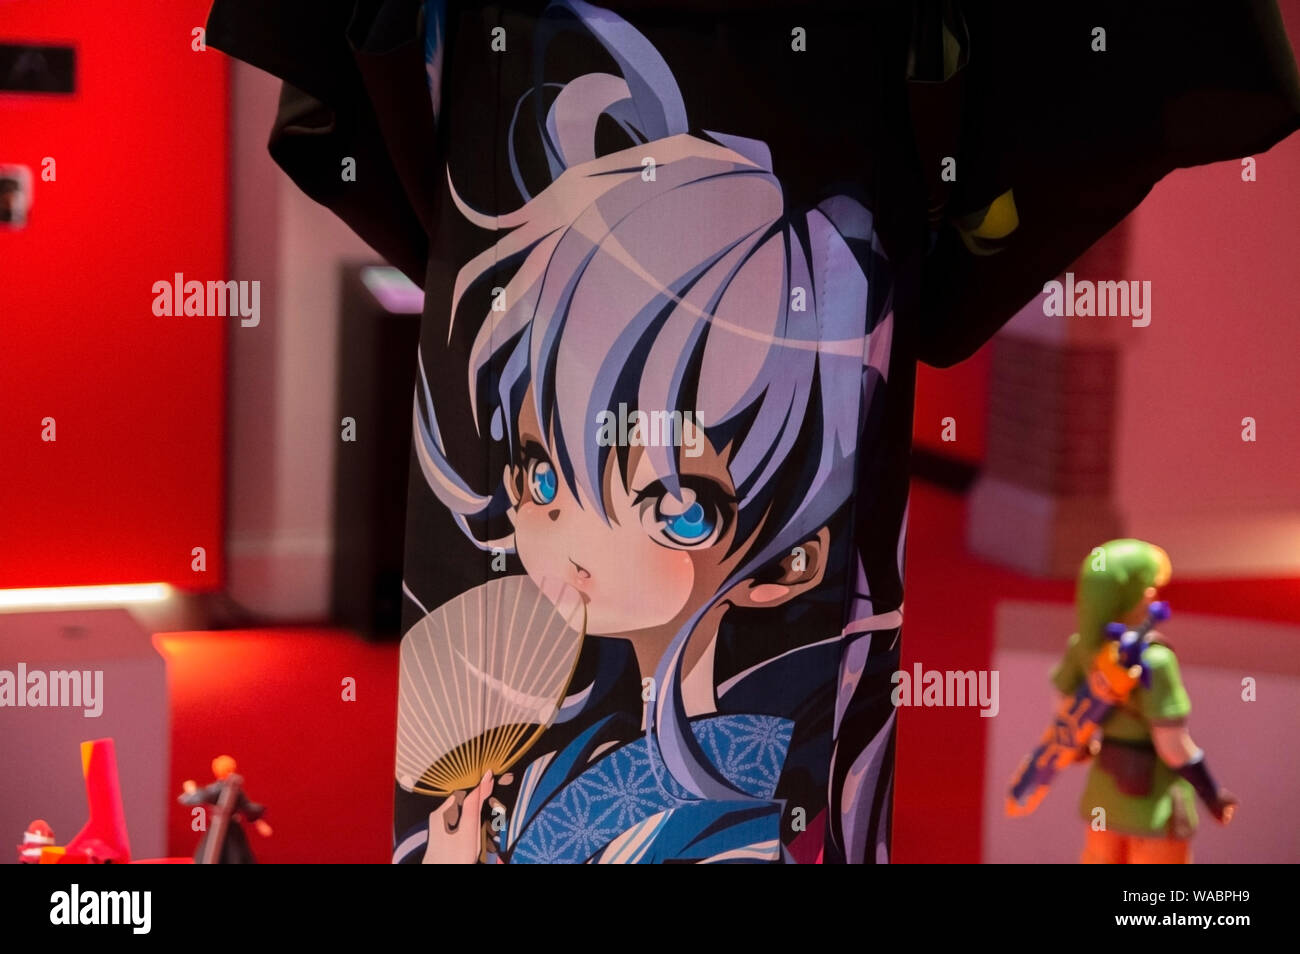 Anime Figure On A Kimono The Cool Japan Exhibition At The Tropenmuseum Amsterdam The Netherlands 2019 Stock Photo